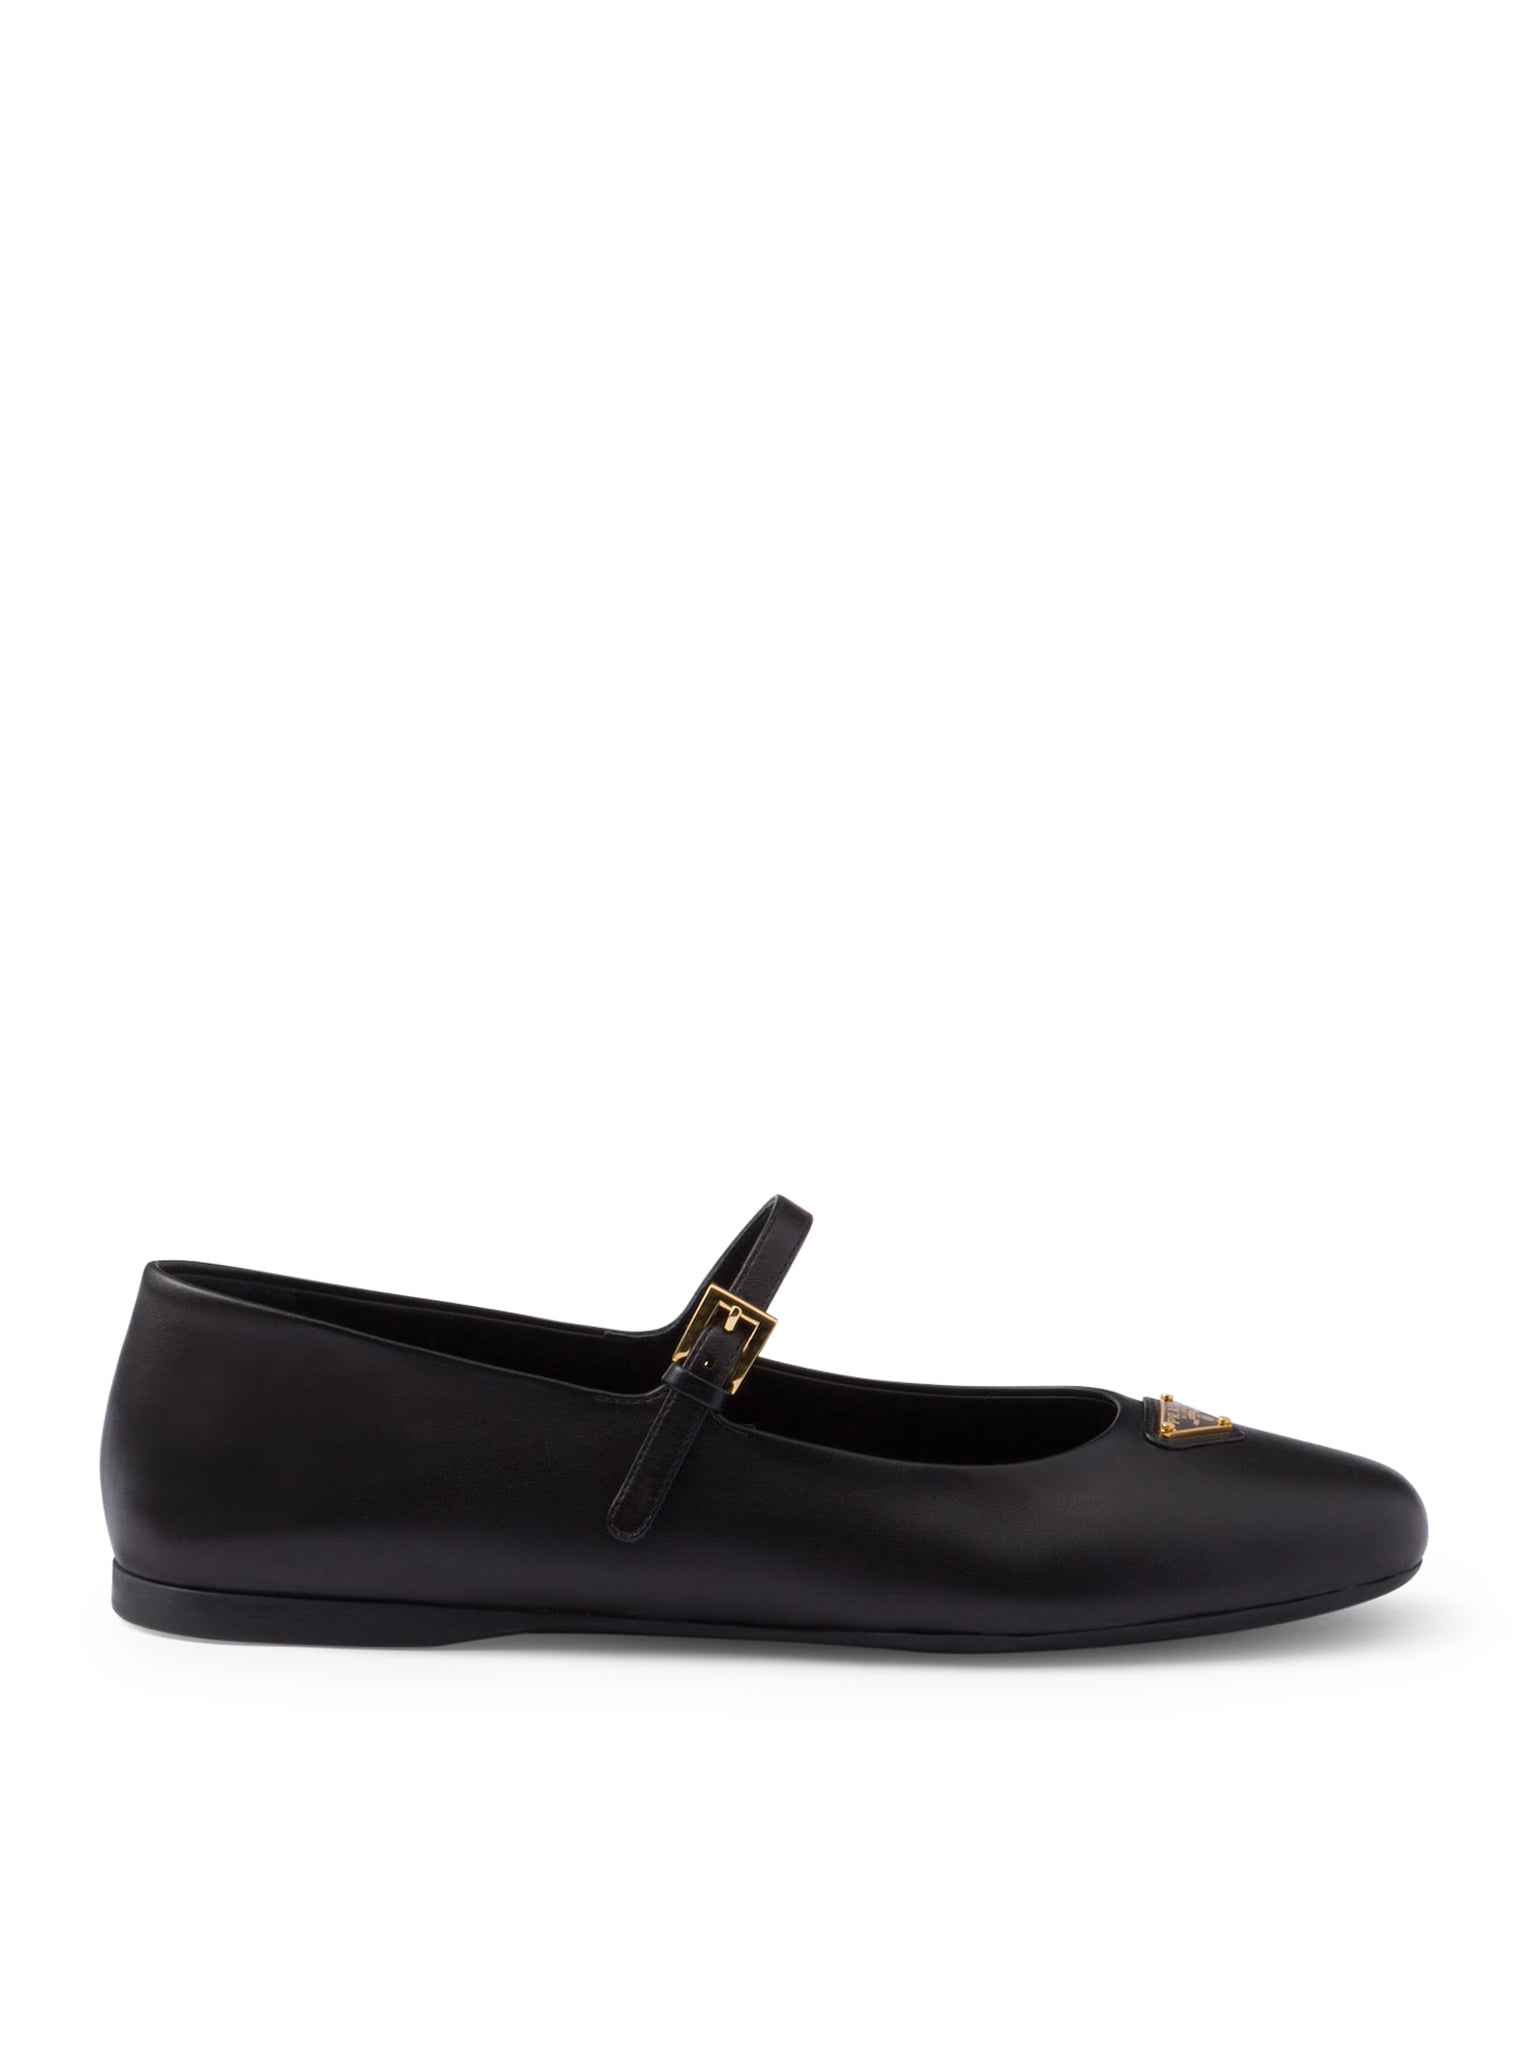 Nappa leather ballet flats